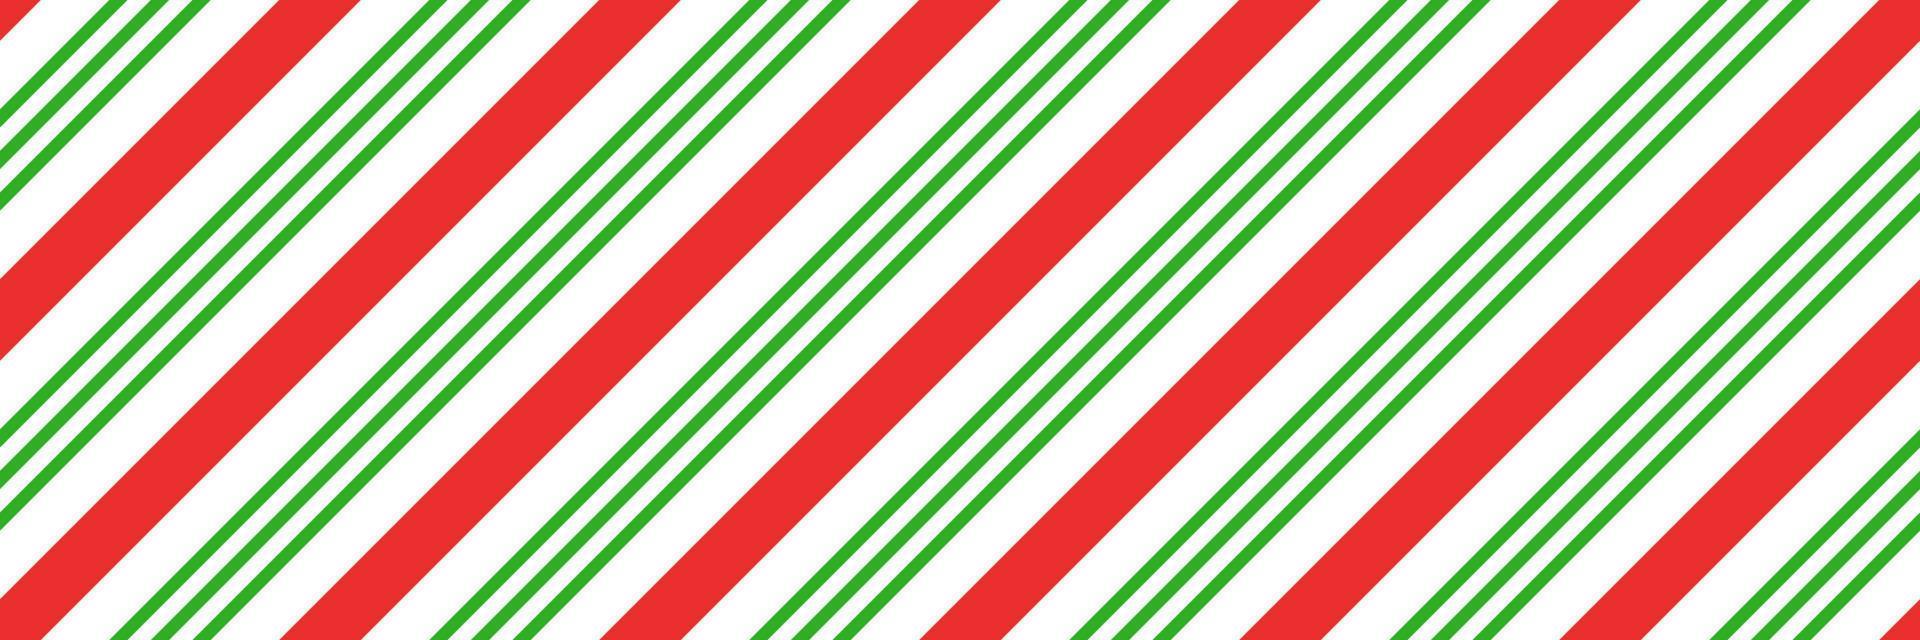 Christmas candy cane striped seamless pattern. Christmas candycane background with red and green stripes. Peppermint caramel diagonal print. Xmas traditional wrapping texture. Vector illustration